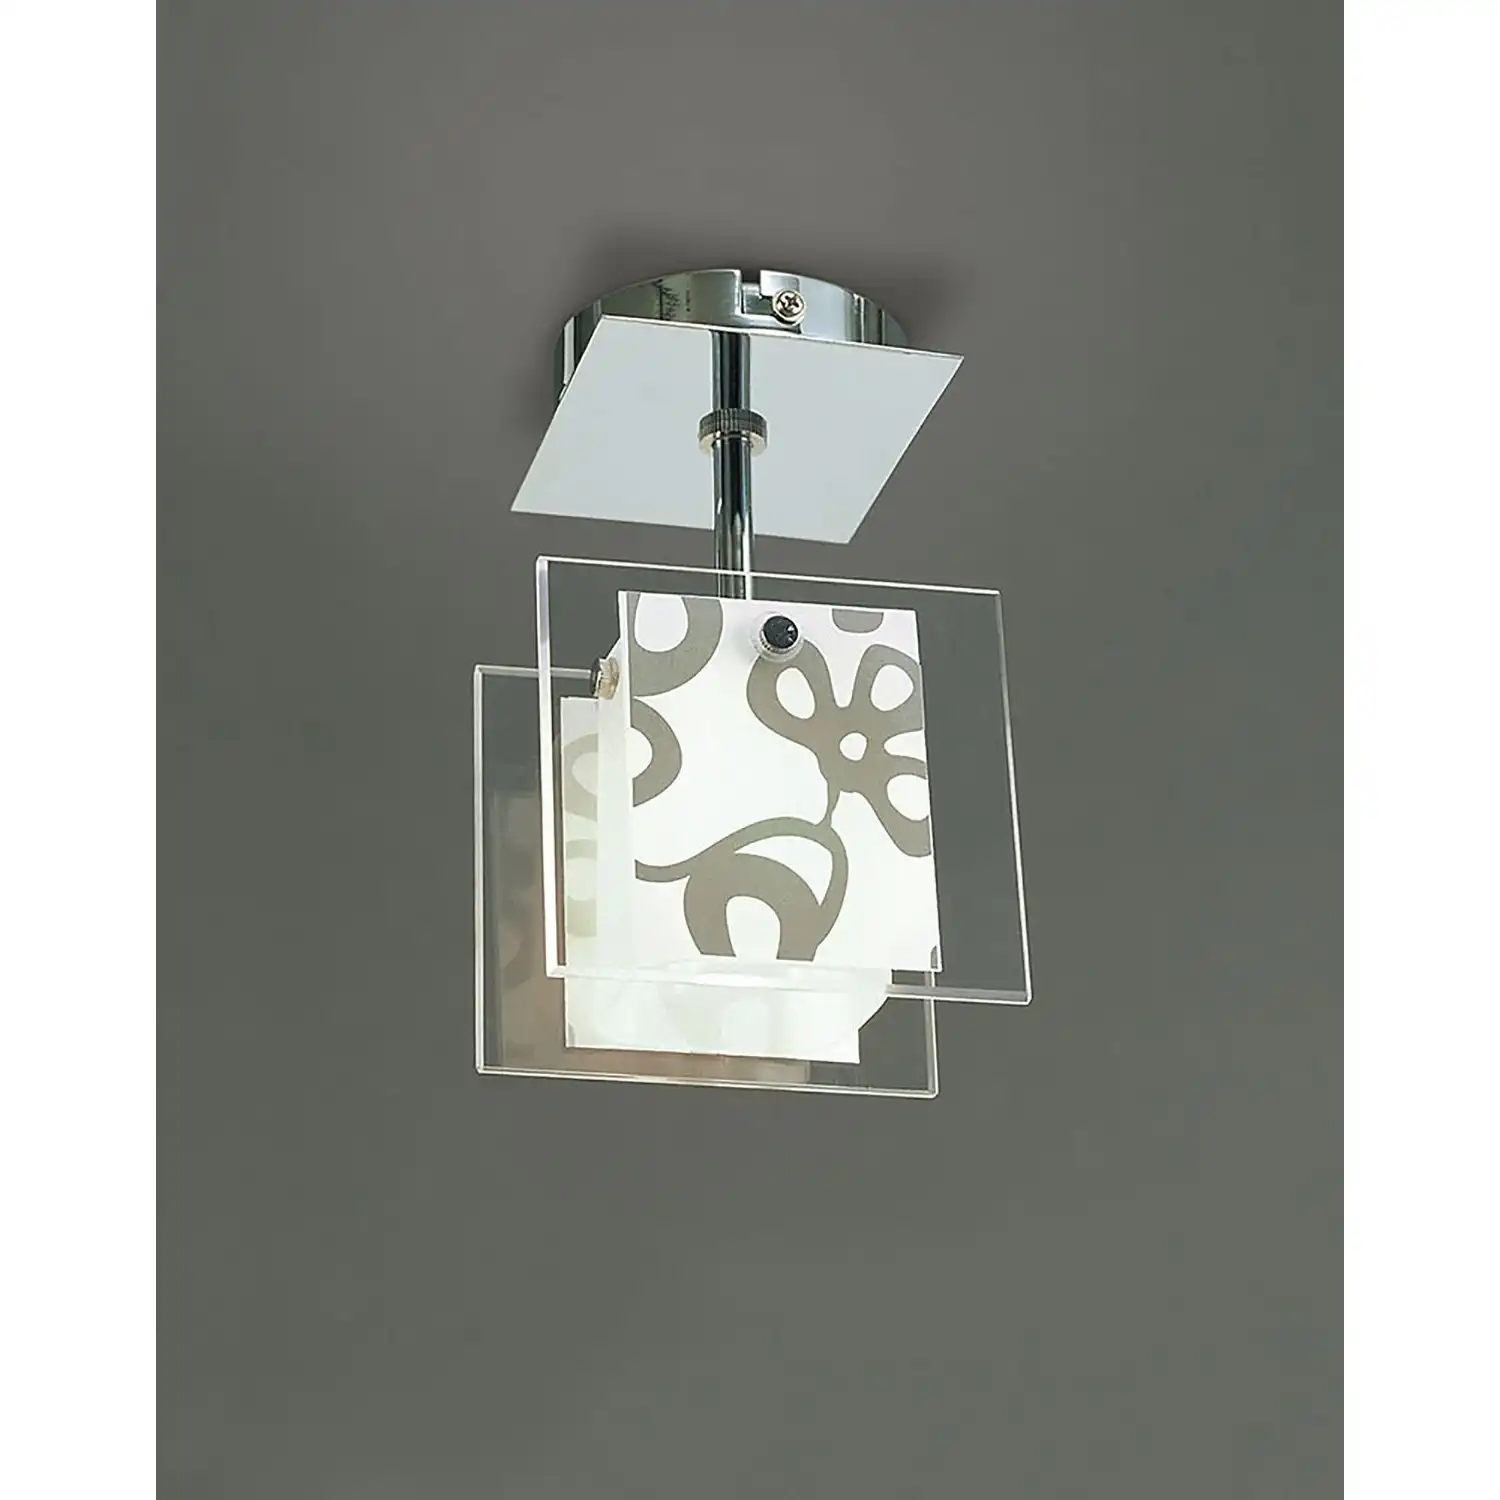 Euphoria Ceiling 1 Light L1 SGU10, Polished Chrome Opal White Glass, CFL Lamps INCLUDED